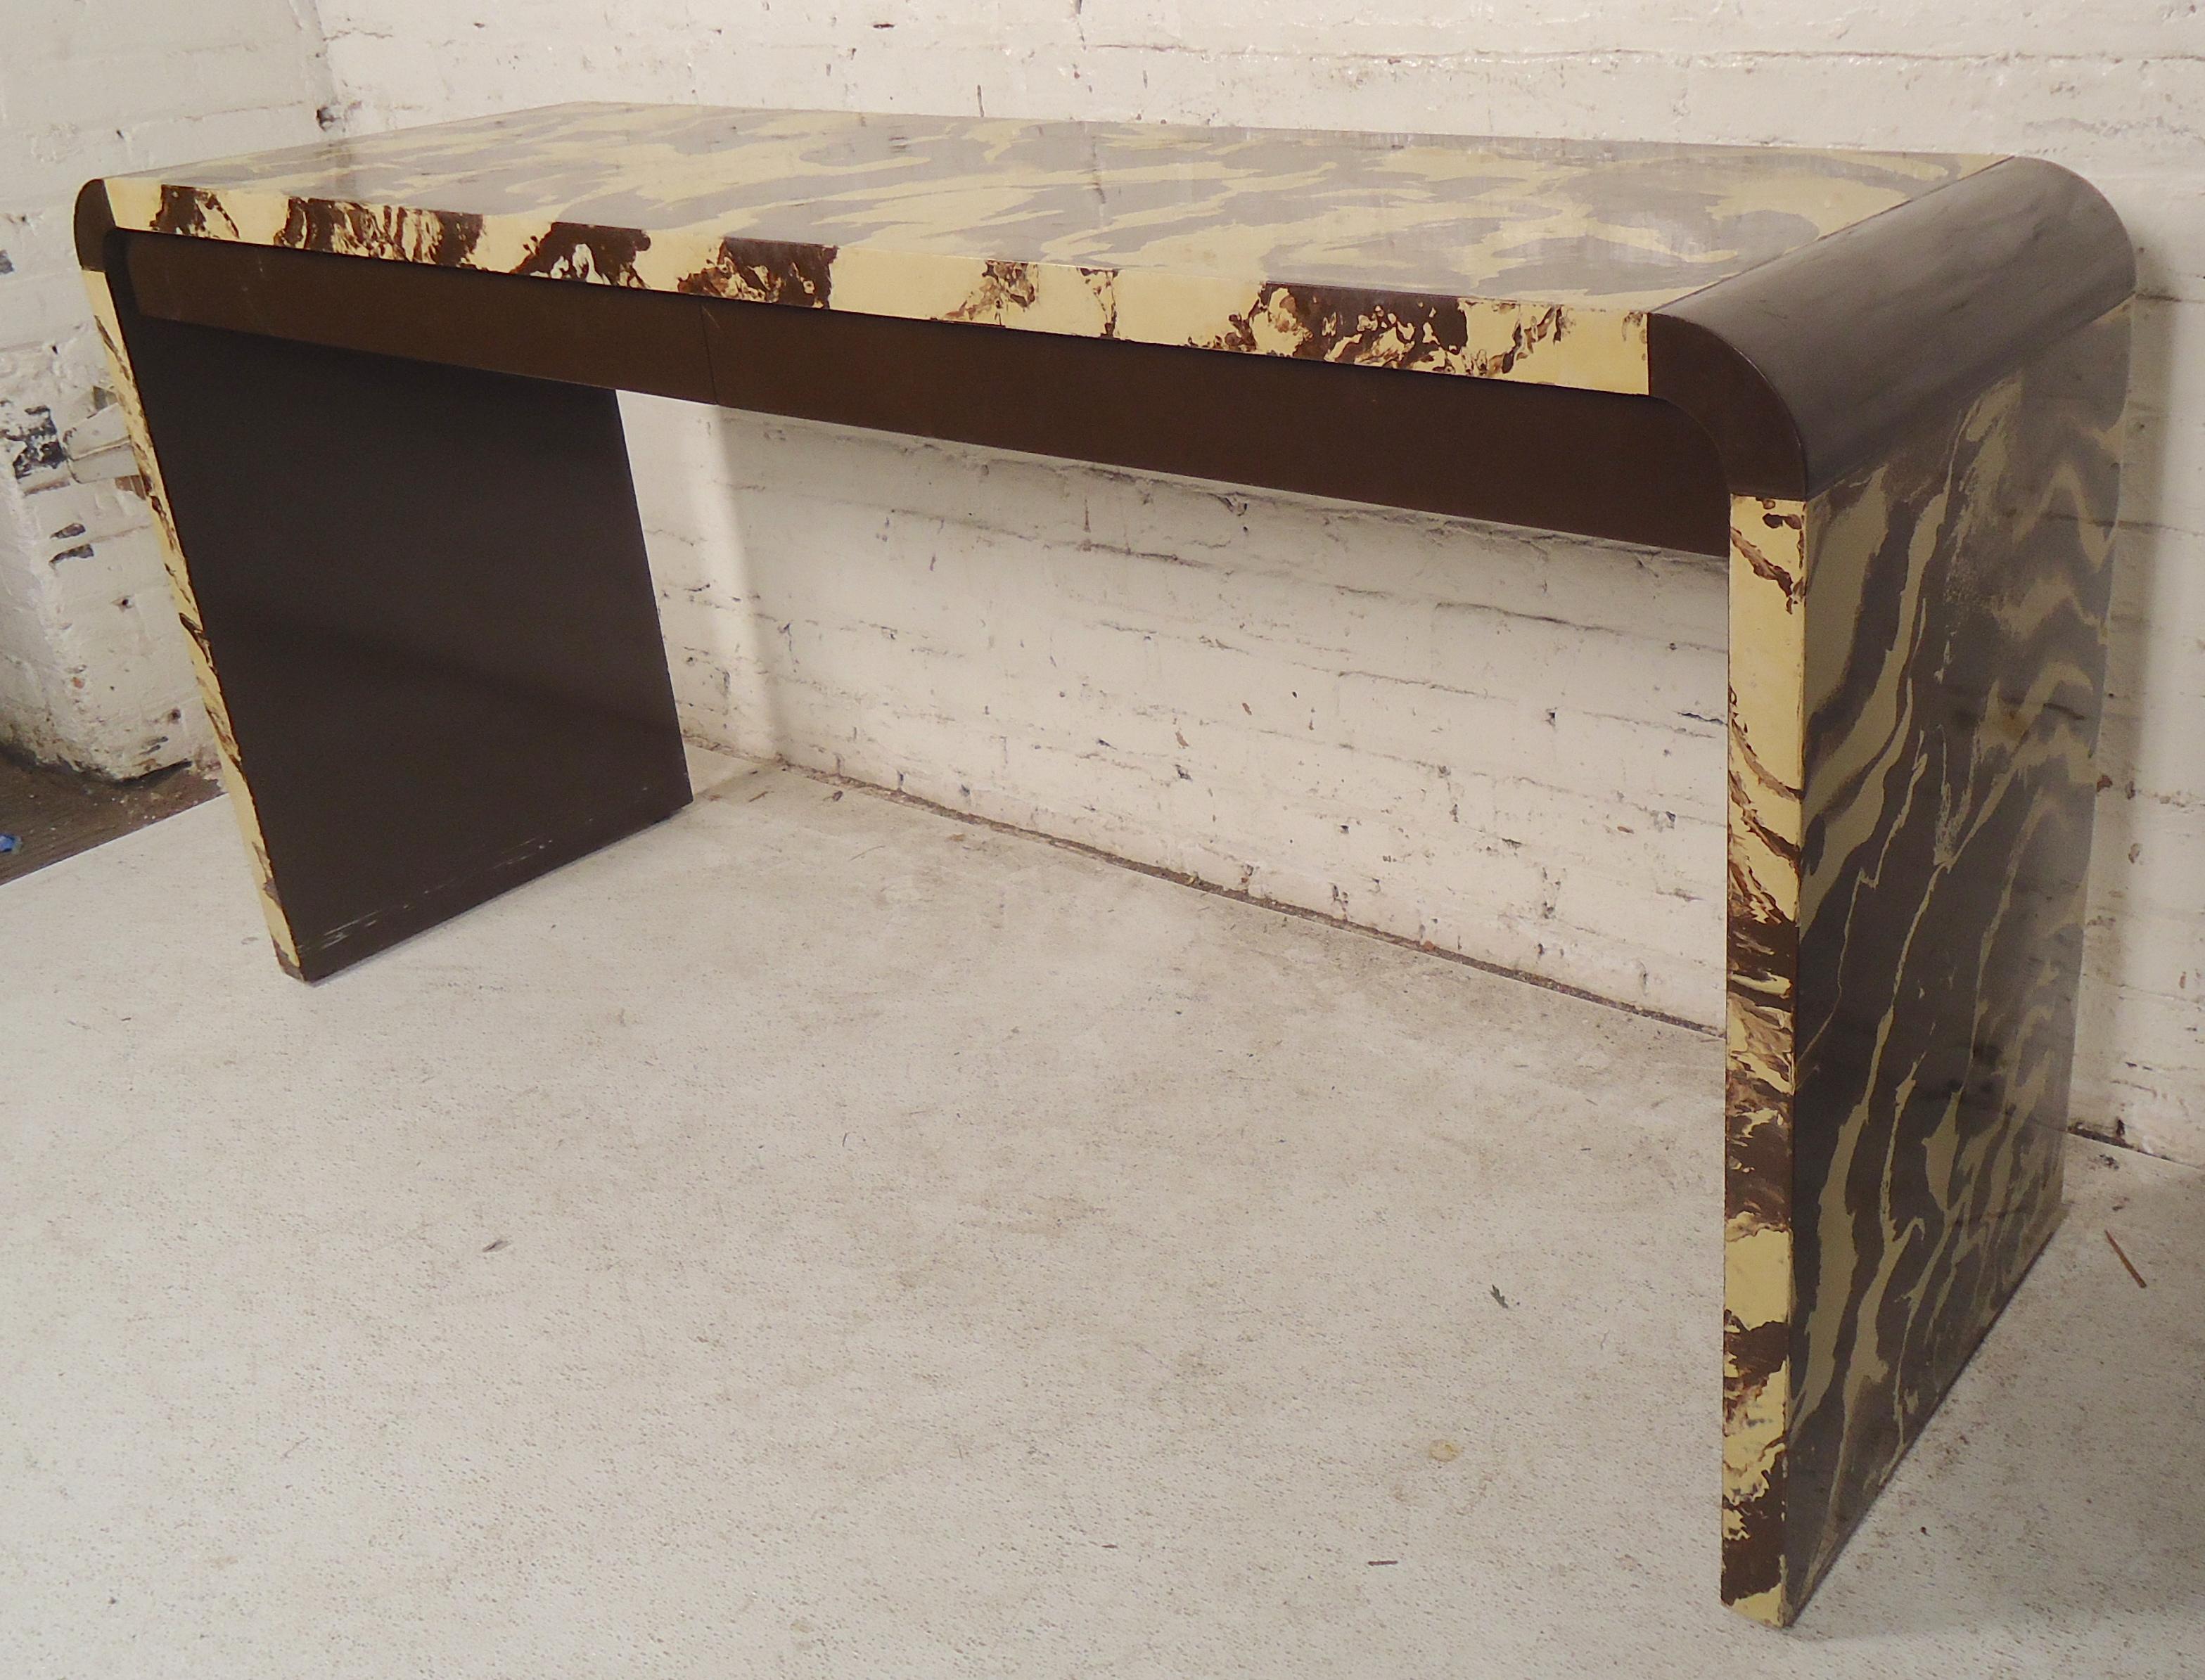 Unusual midcentury console table with marbling color and two storage drawers.
(Please confirm item location - NY or NJ - with dealer).
 